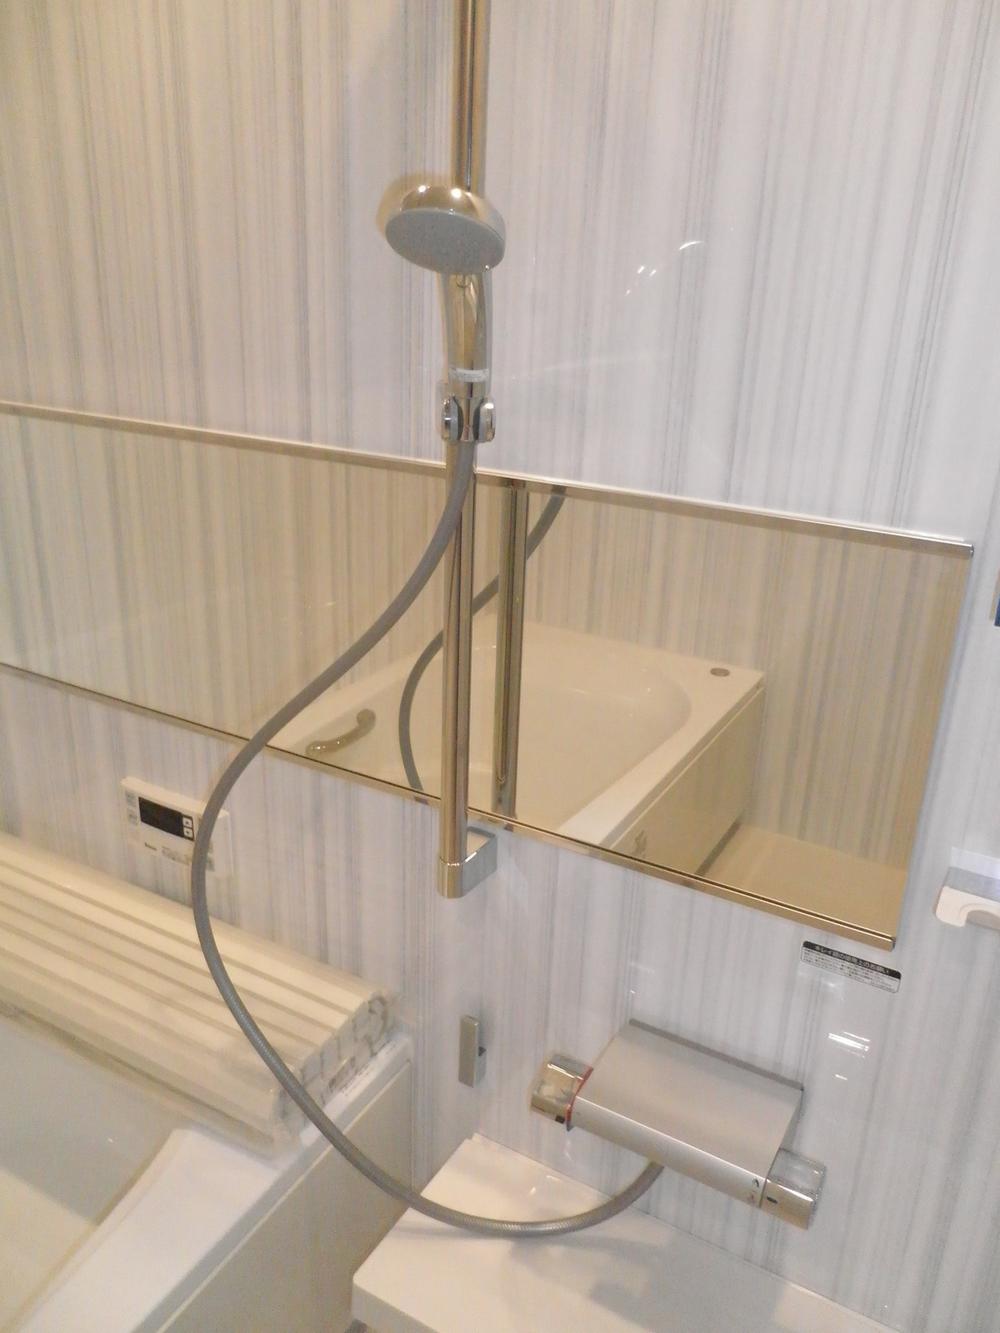 Same specifications photo (bathroom). System bus construction cases